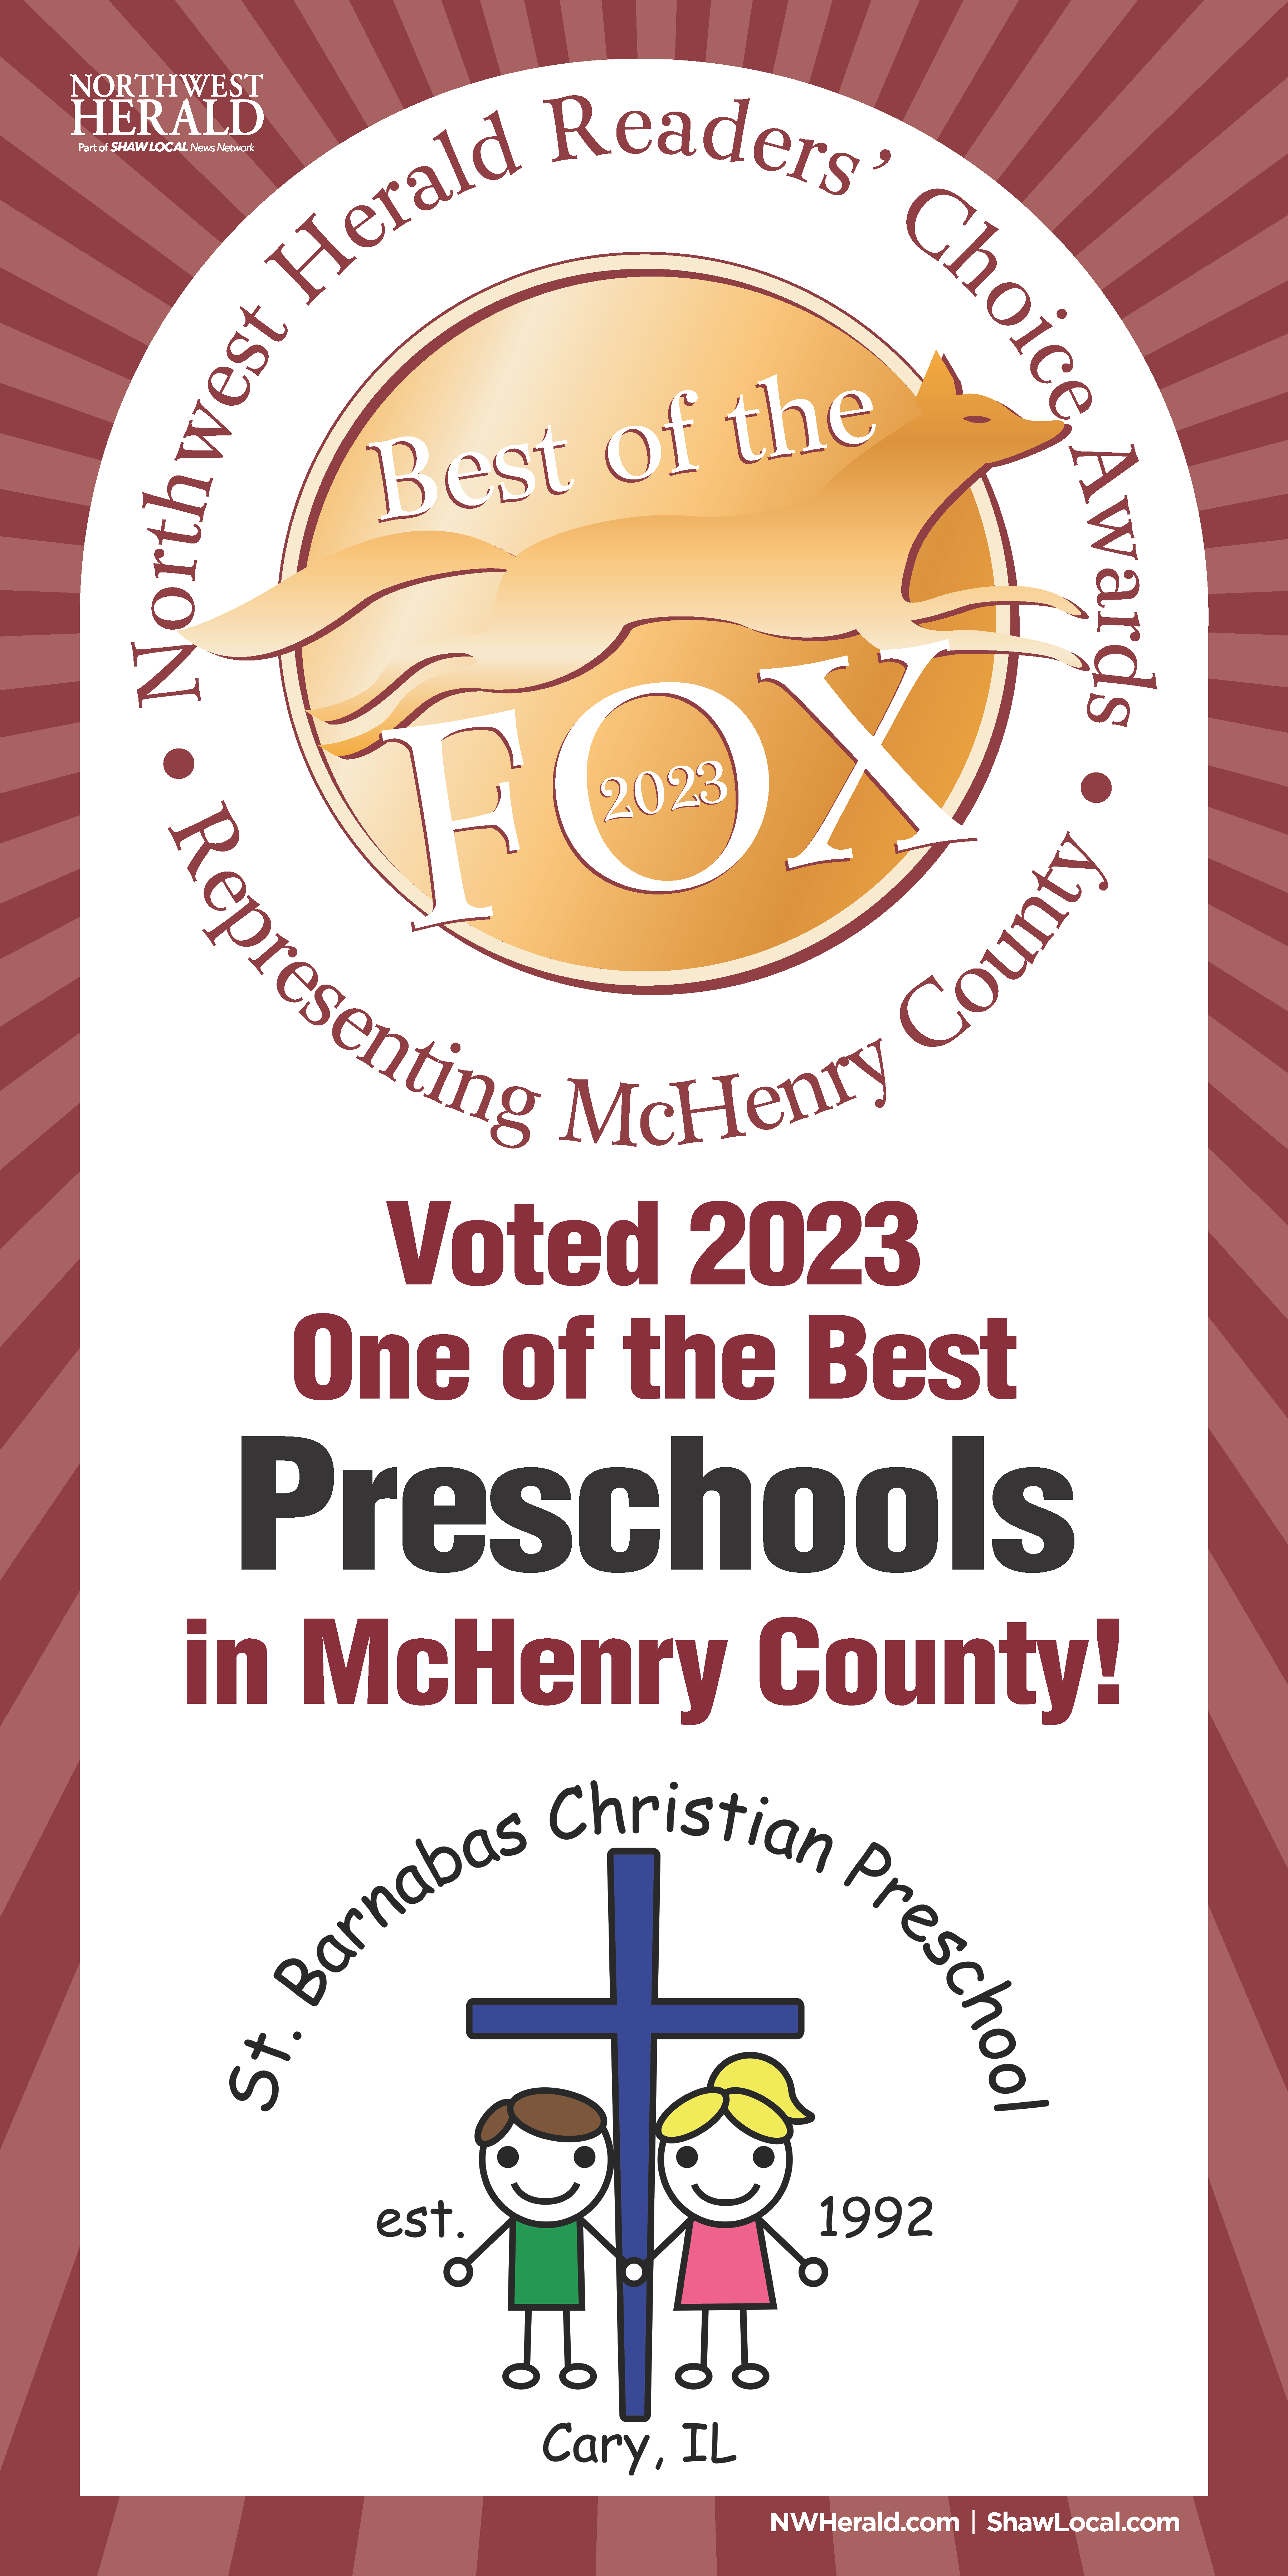 A graphic of the best of the fox 2023 award featuring St. Barnabas Christian Preschool